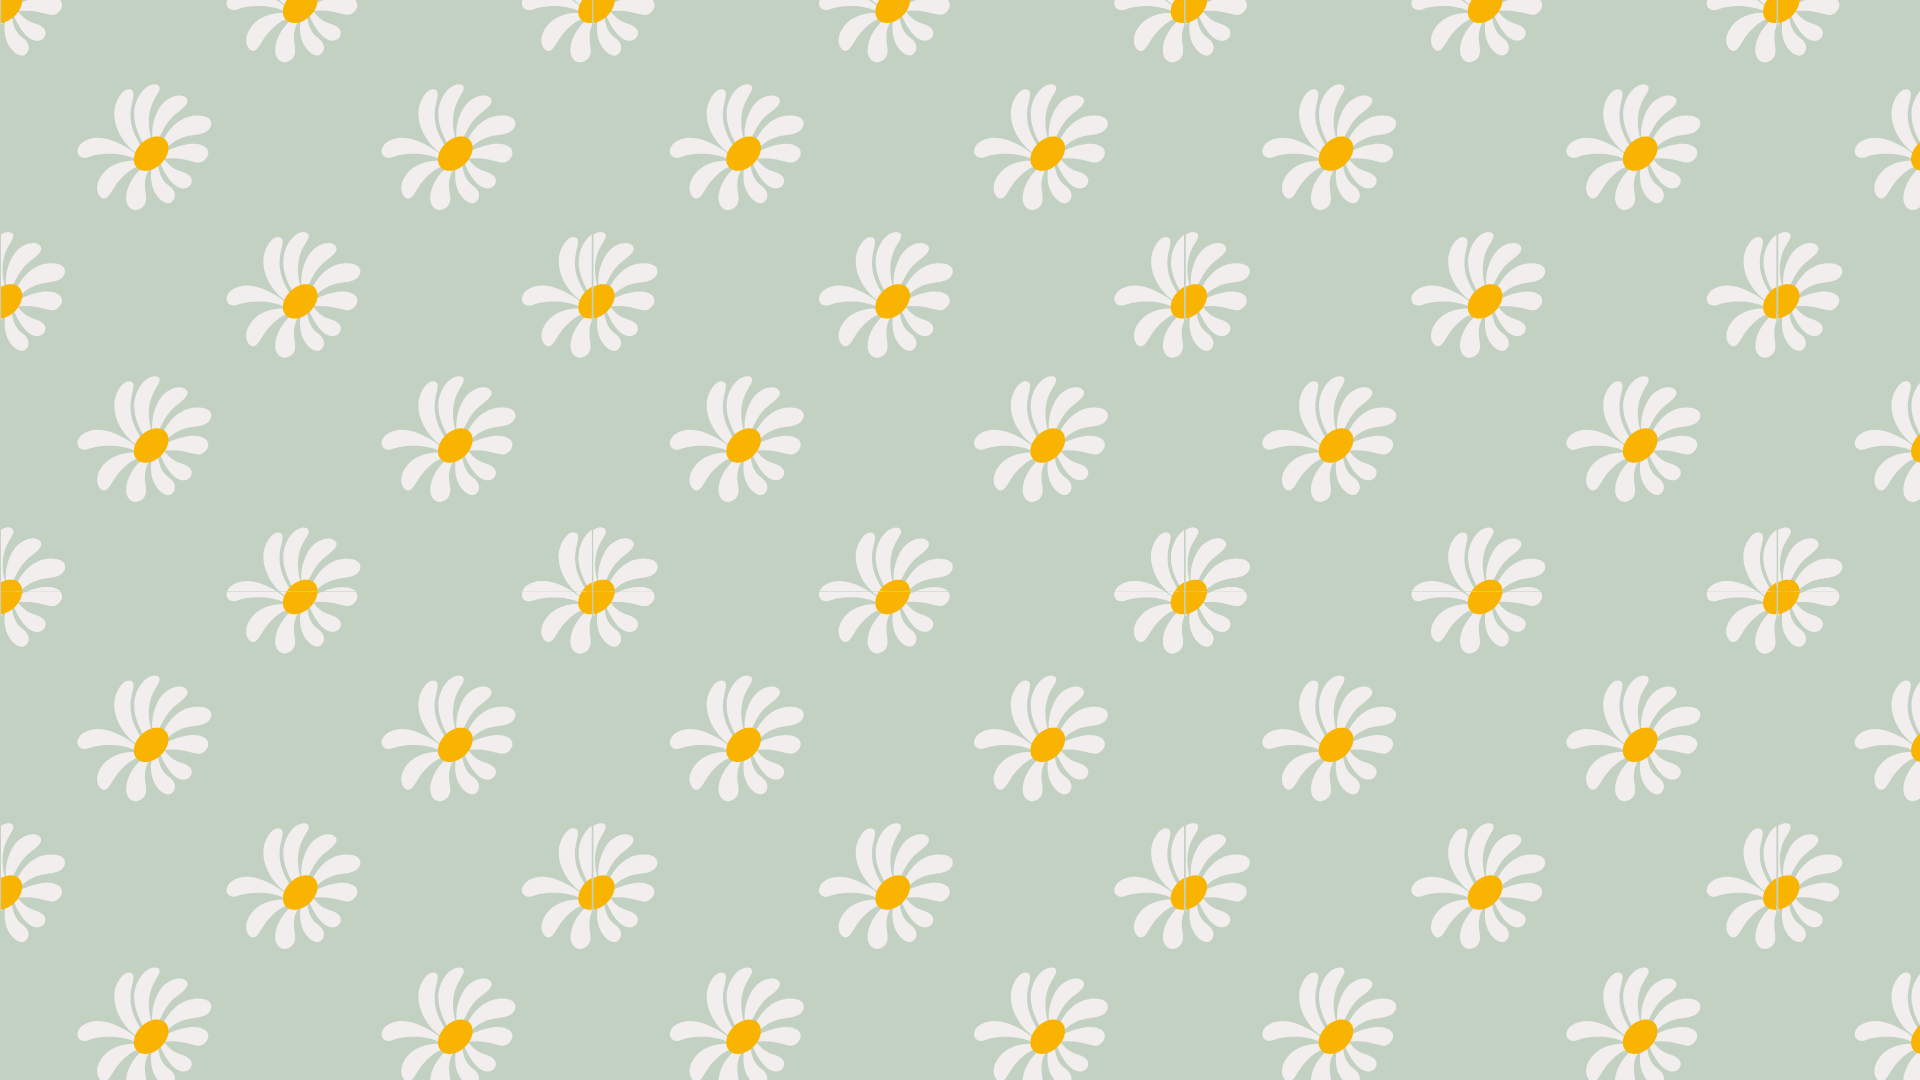 A pattern of daisies on green background - Green, sage green